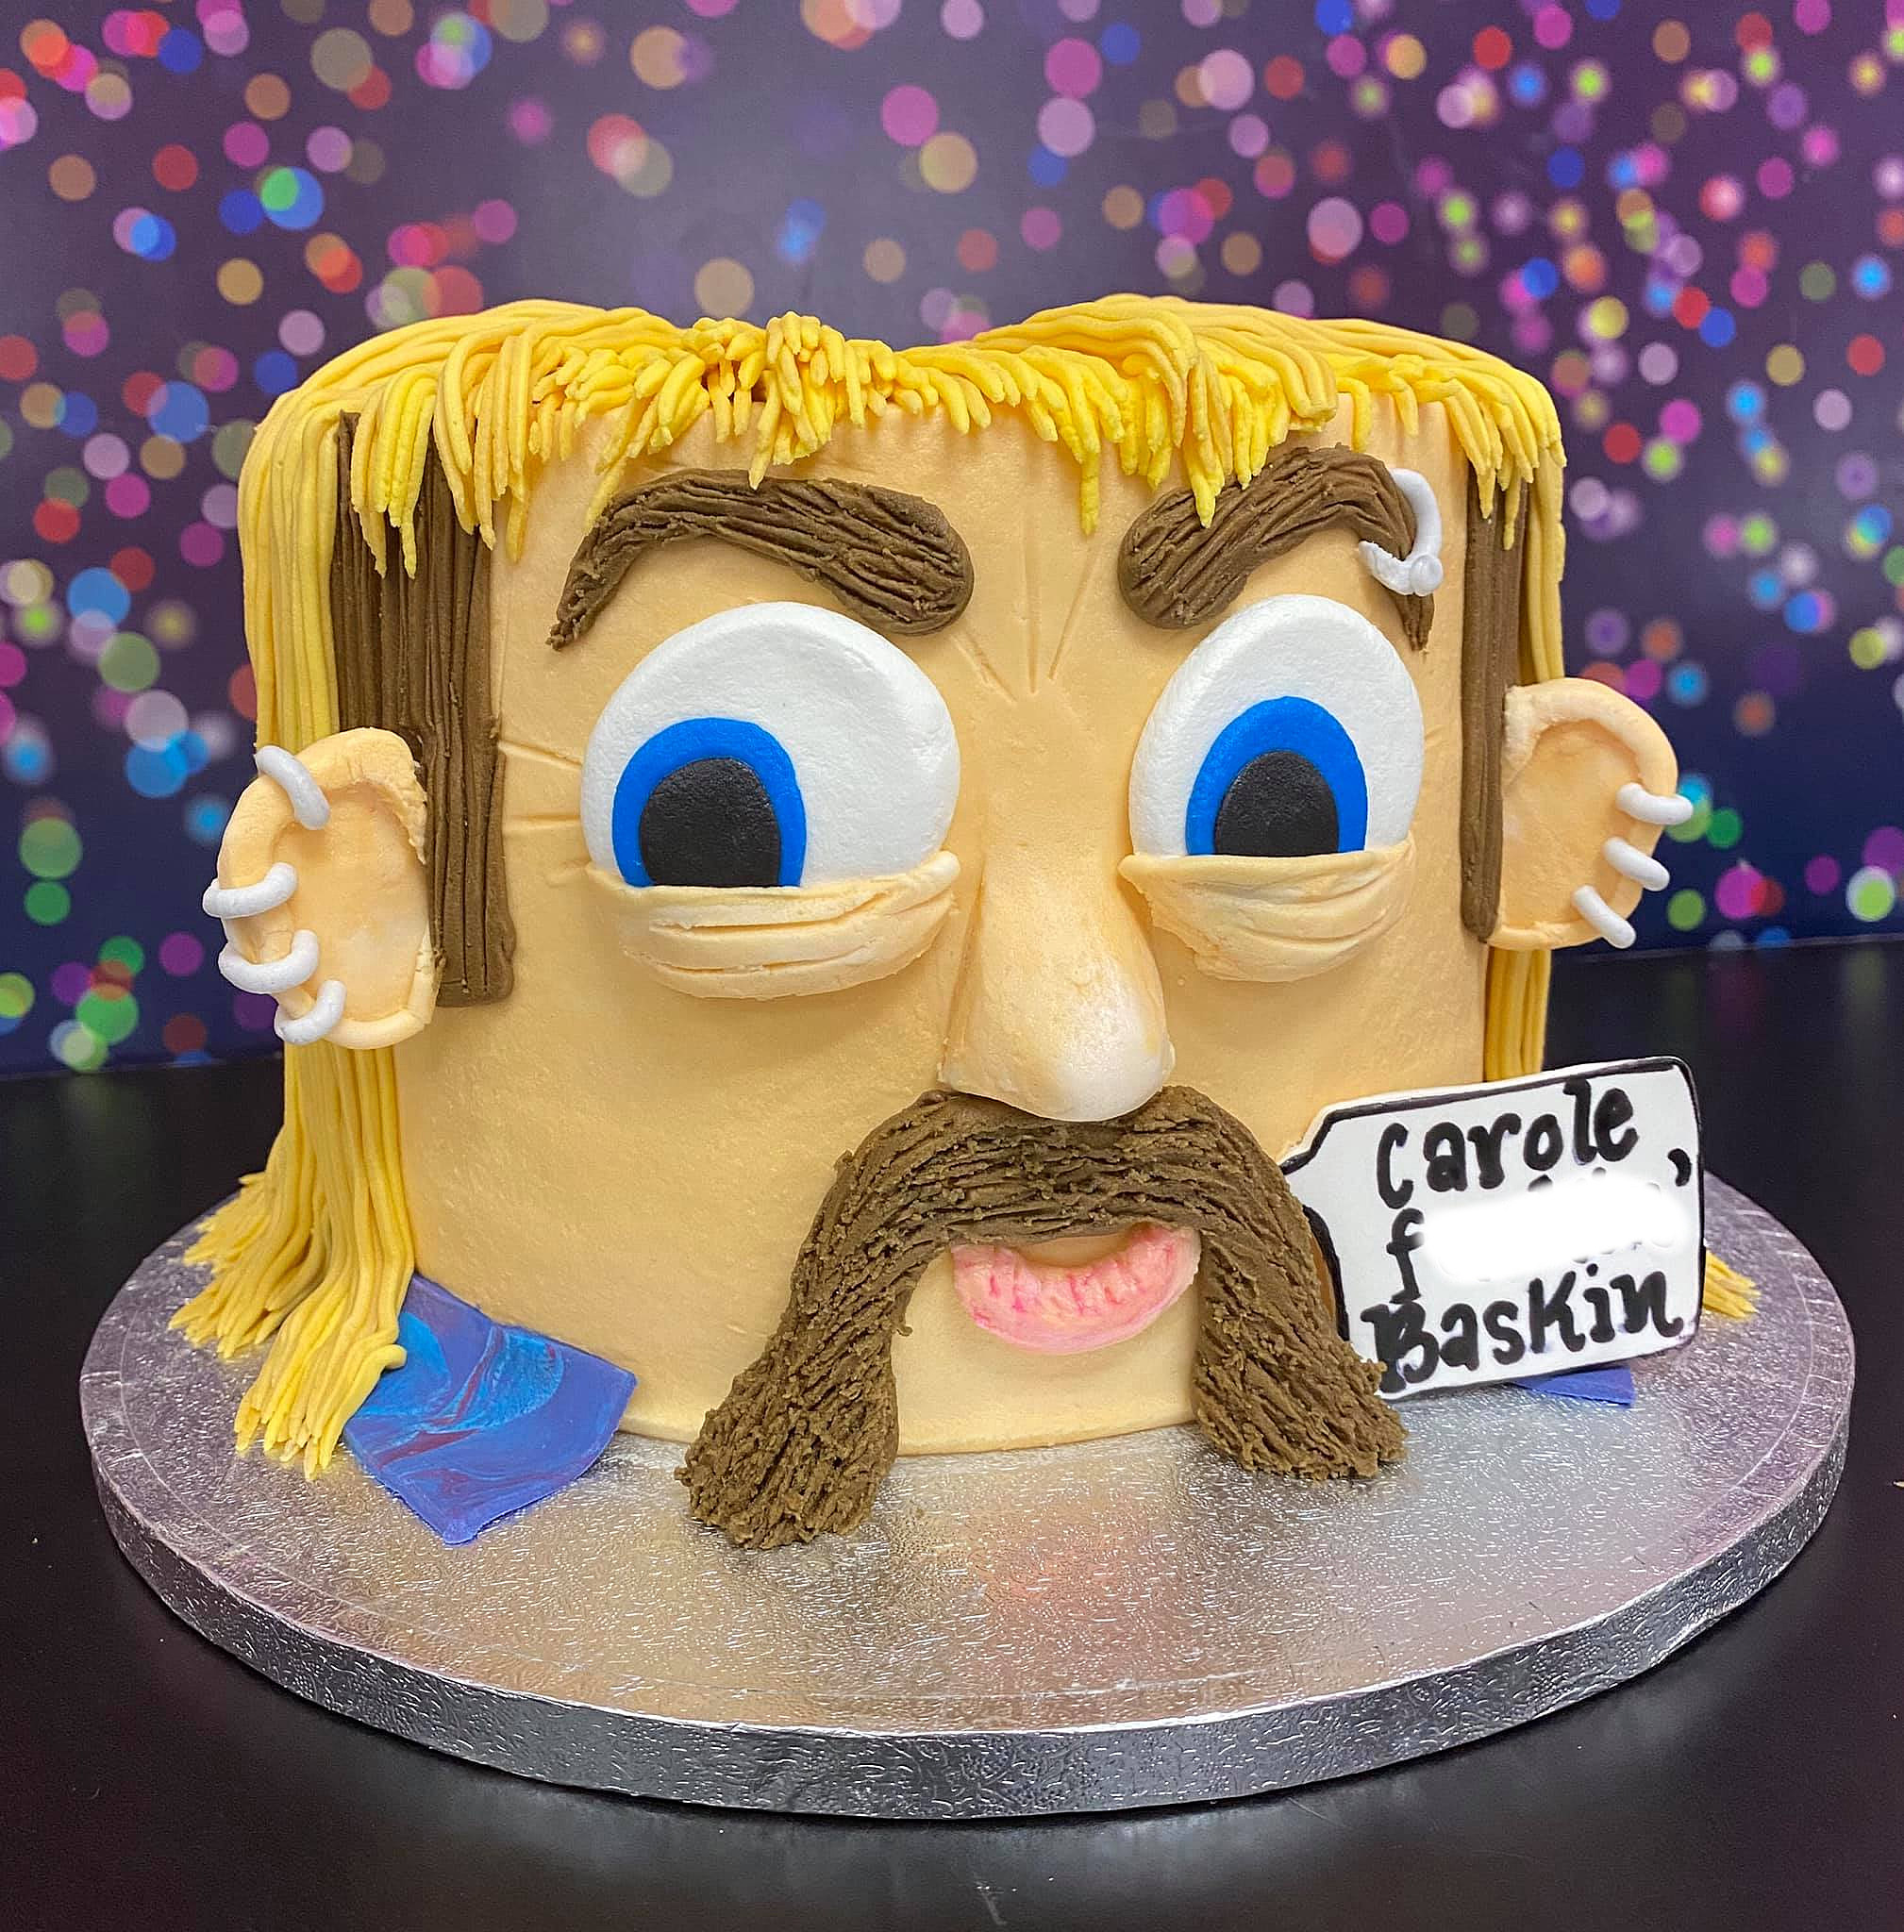 Terrific Obelix and Asterix Cake - Between The Pages Blog